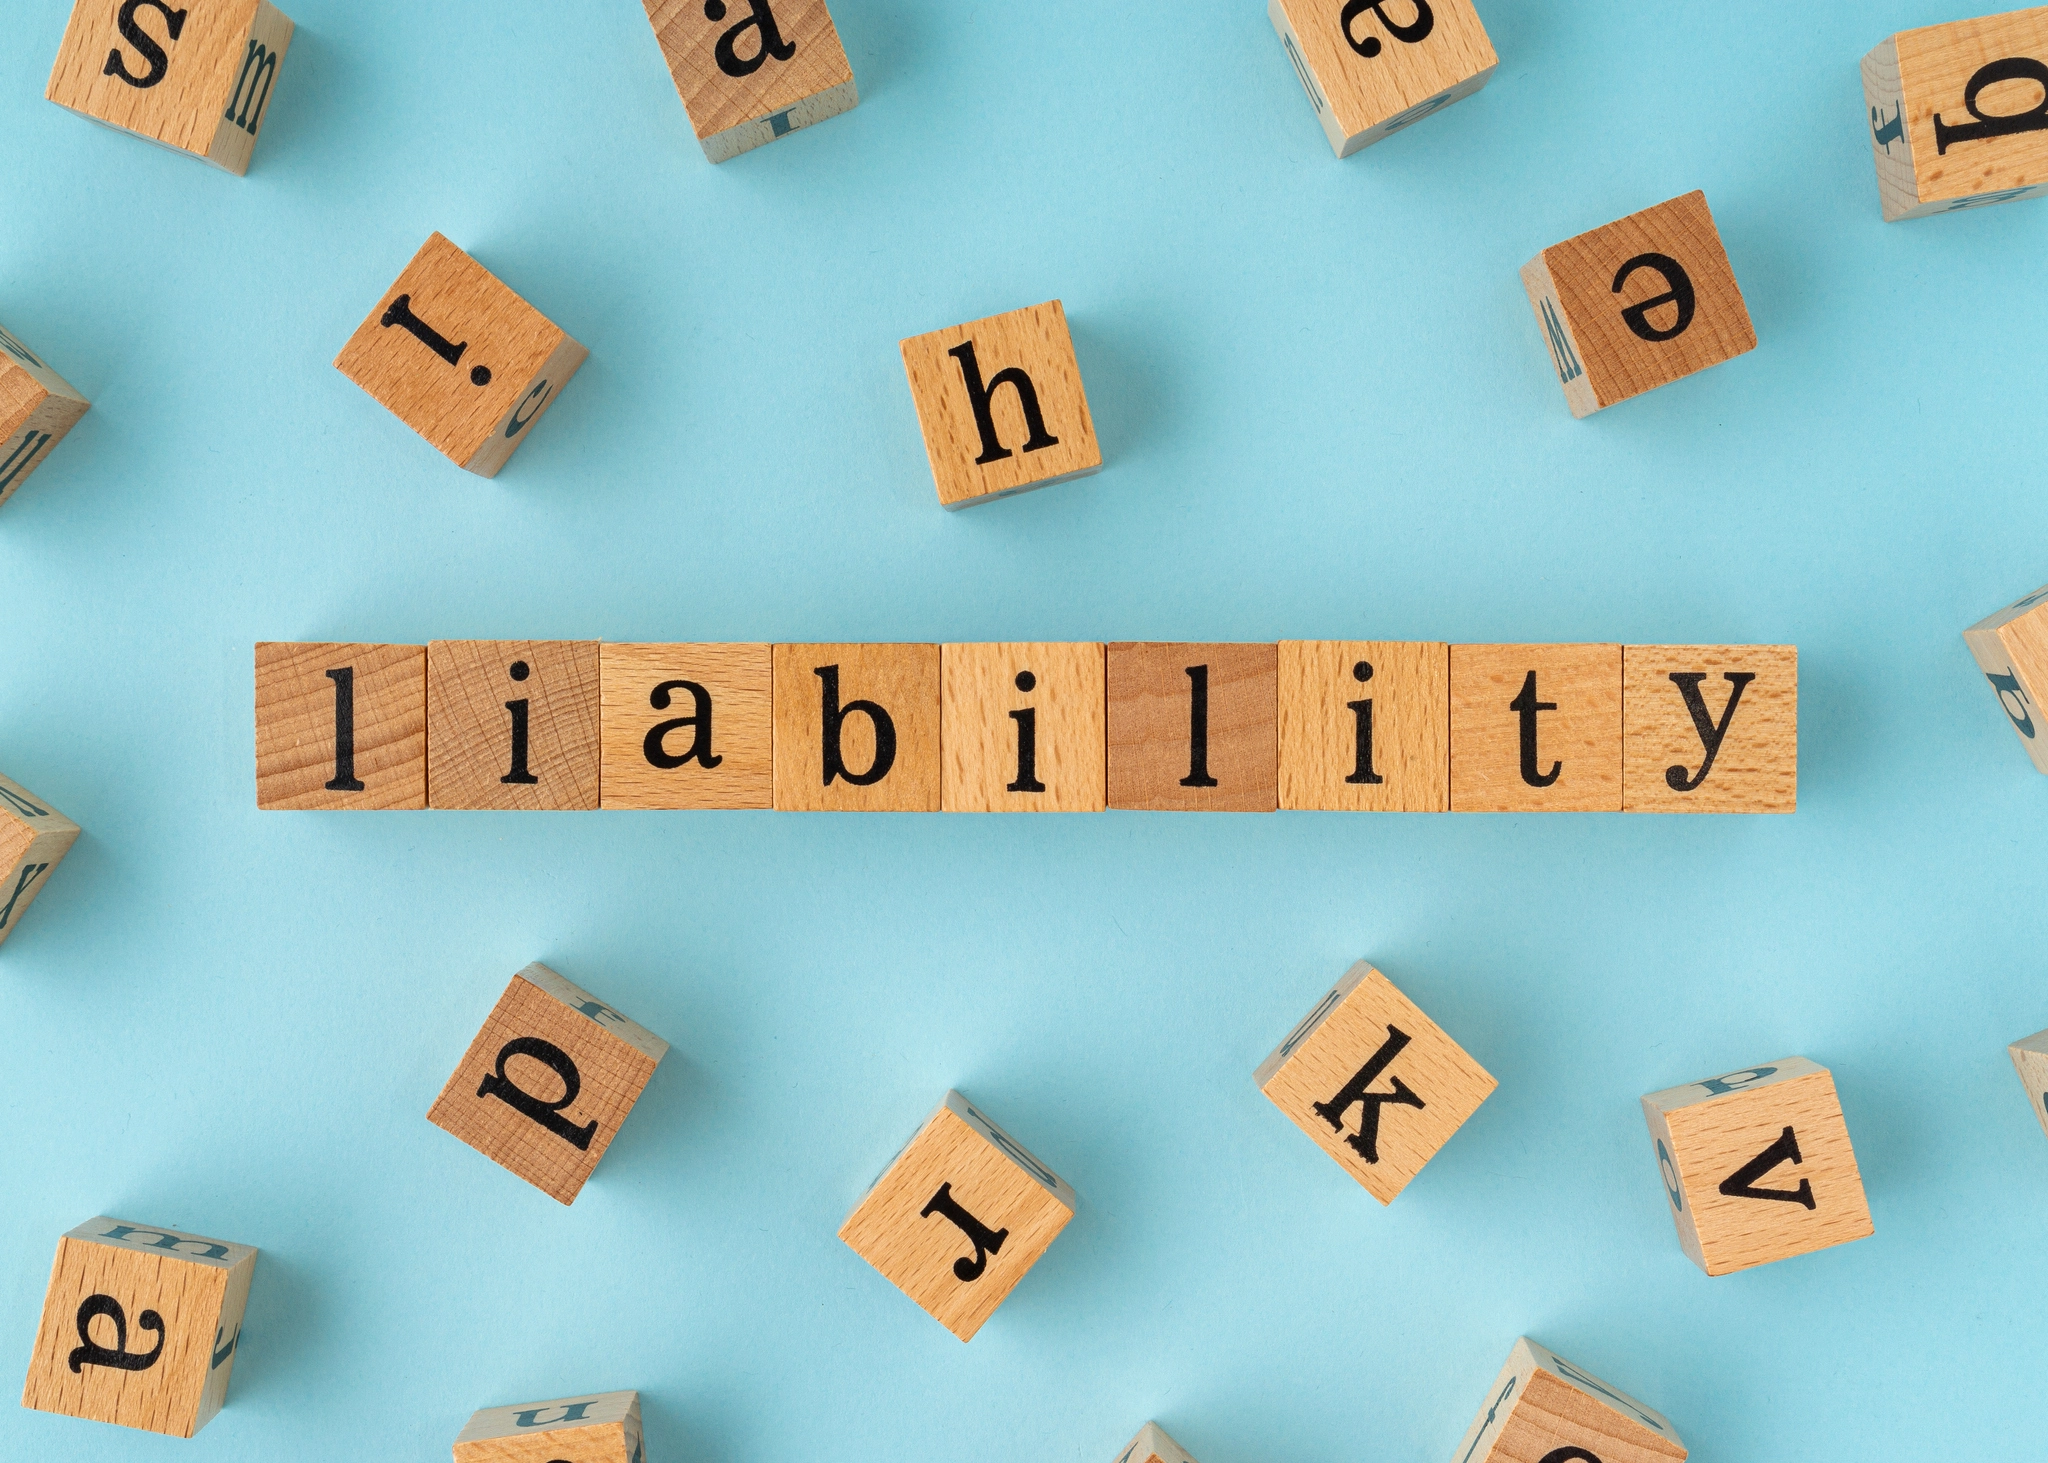 "Liability" is spelled out using Scrabble tiles against a light blue backdrop.